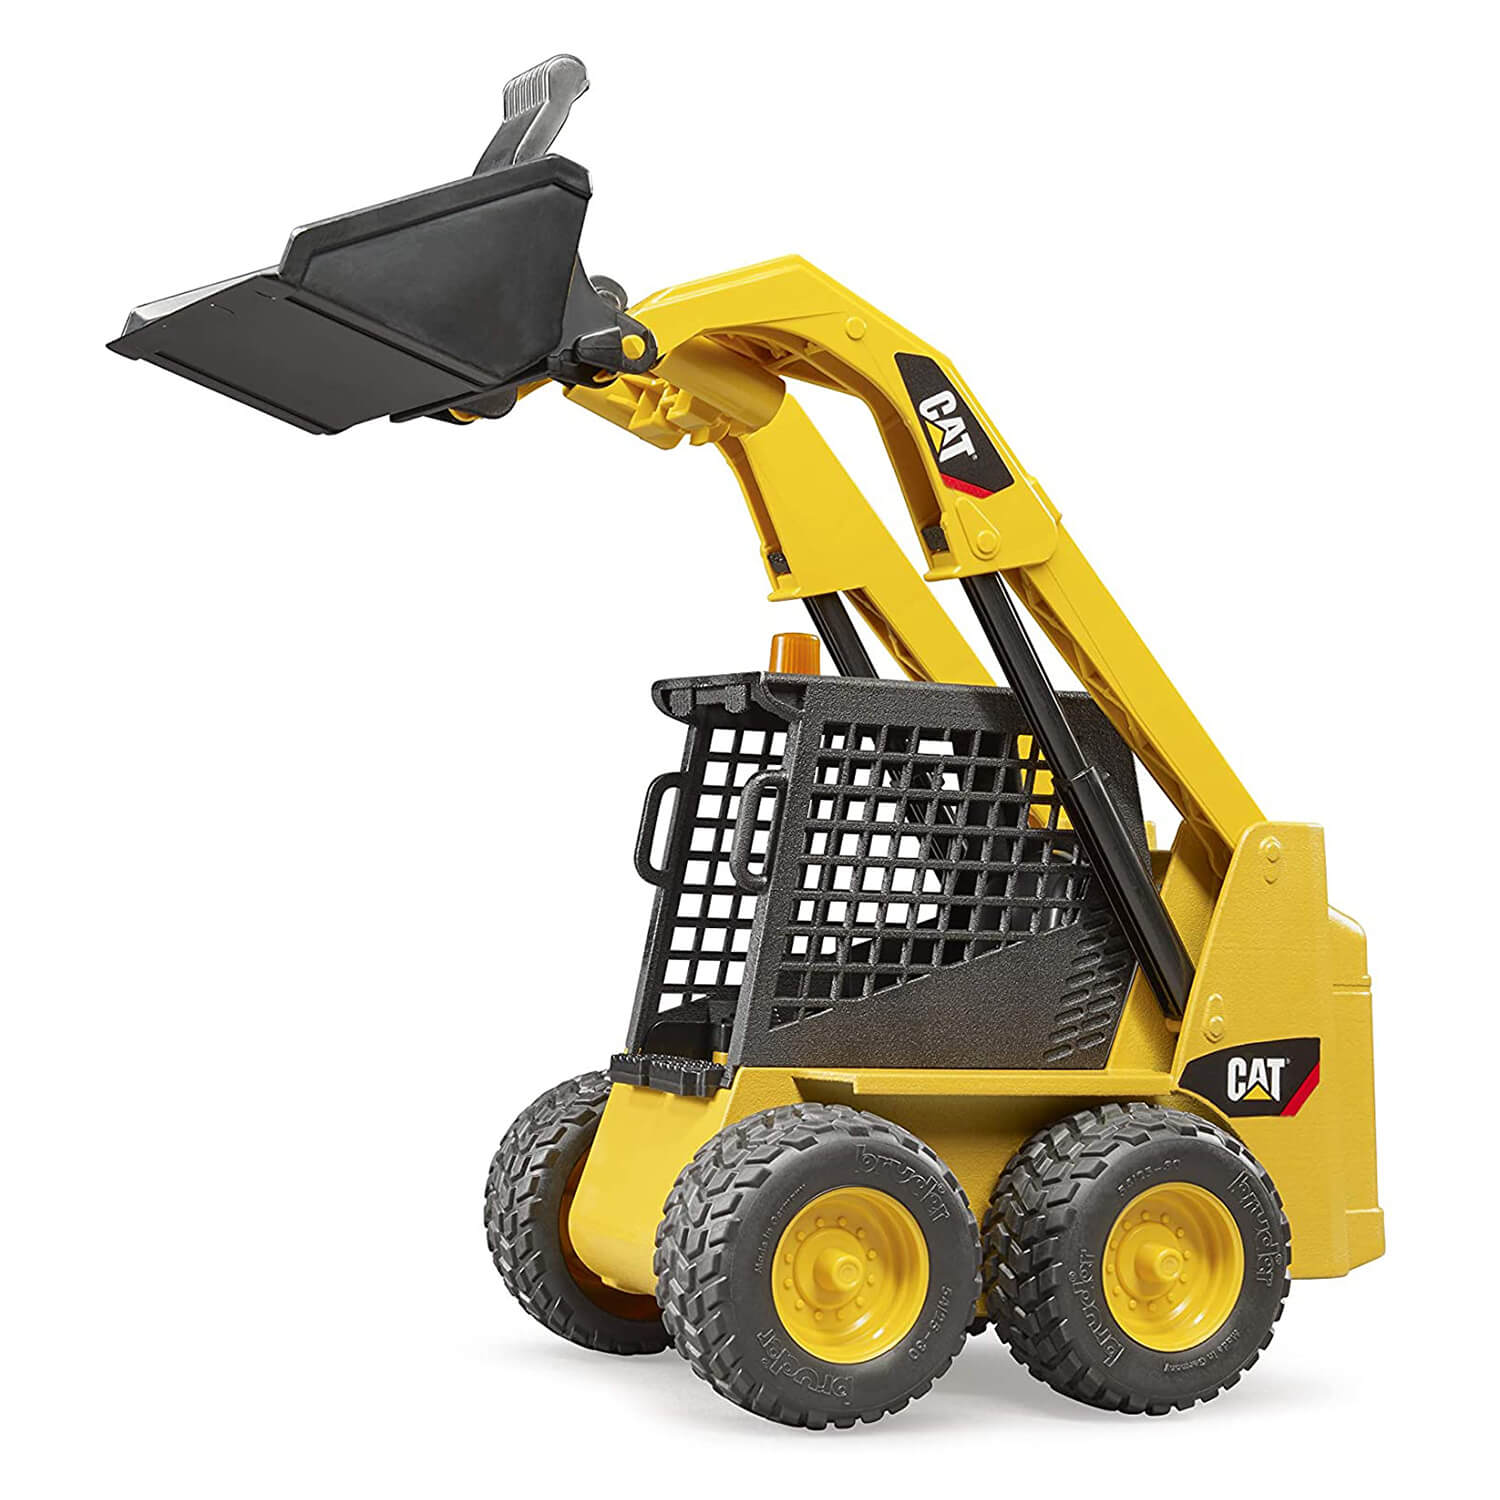 Including numerous accessories, the detachable shovel is lifted high above the Bruder CAT Skid Steer Loader..